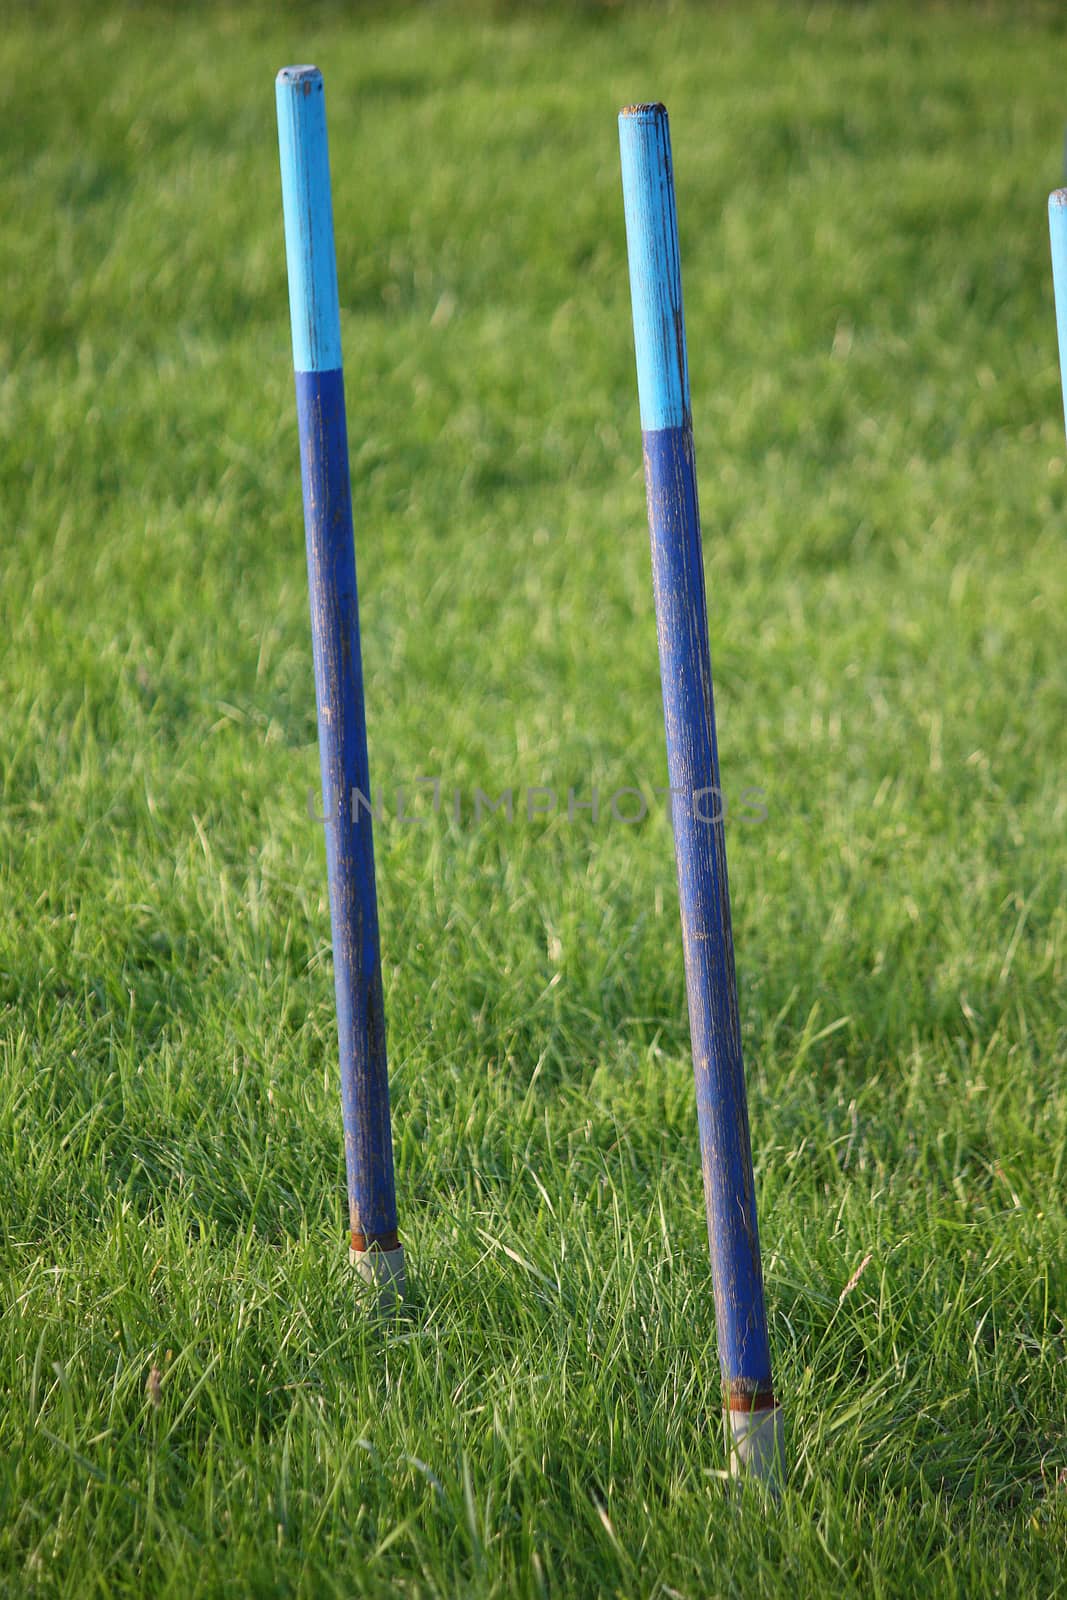 blue agility weave pole items of equipment for dog sport by chrisga